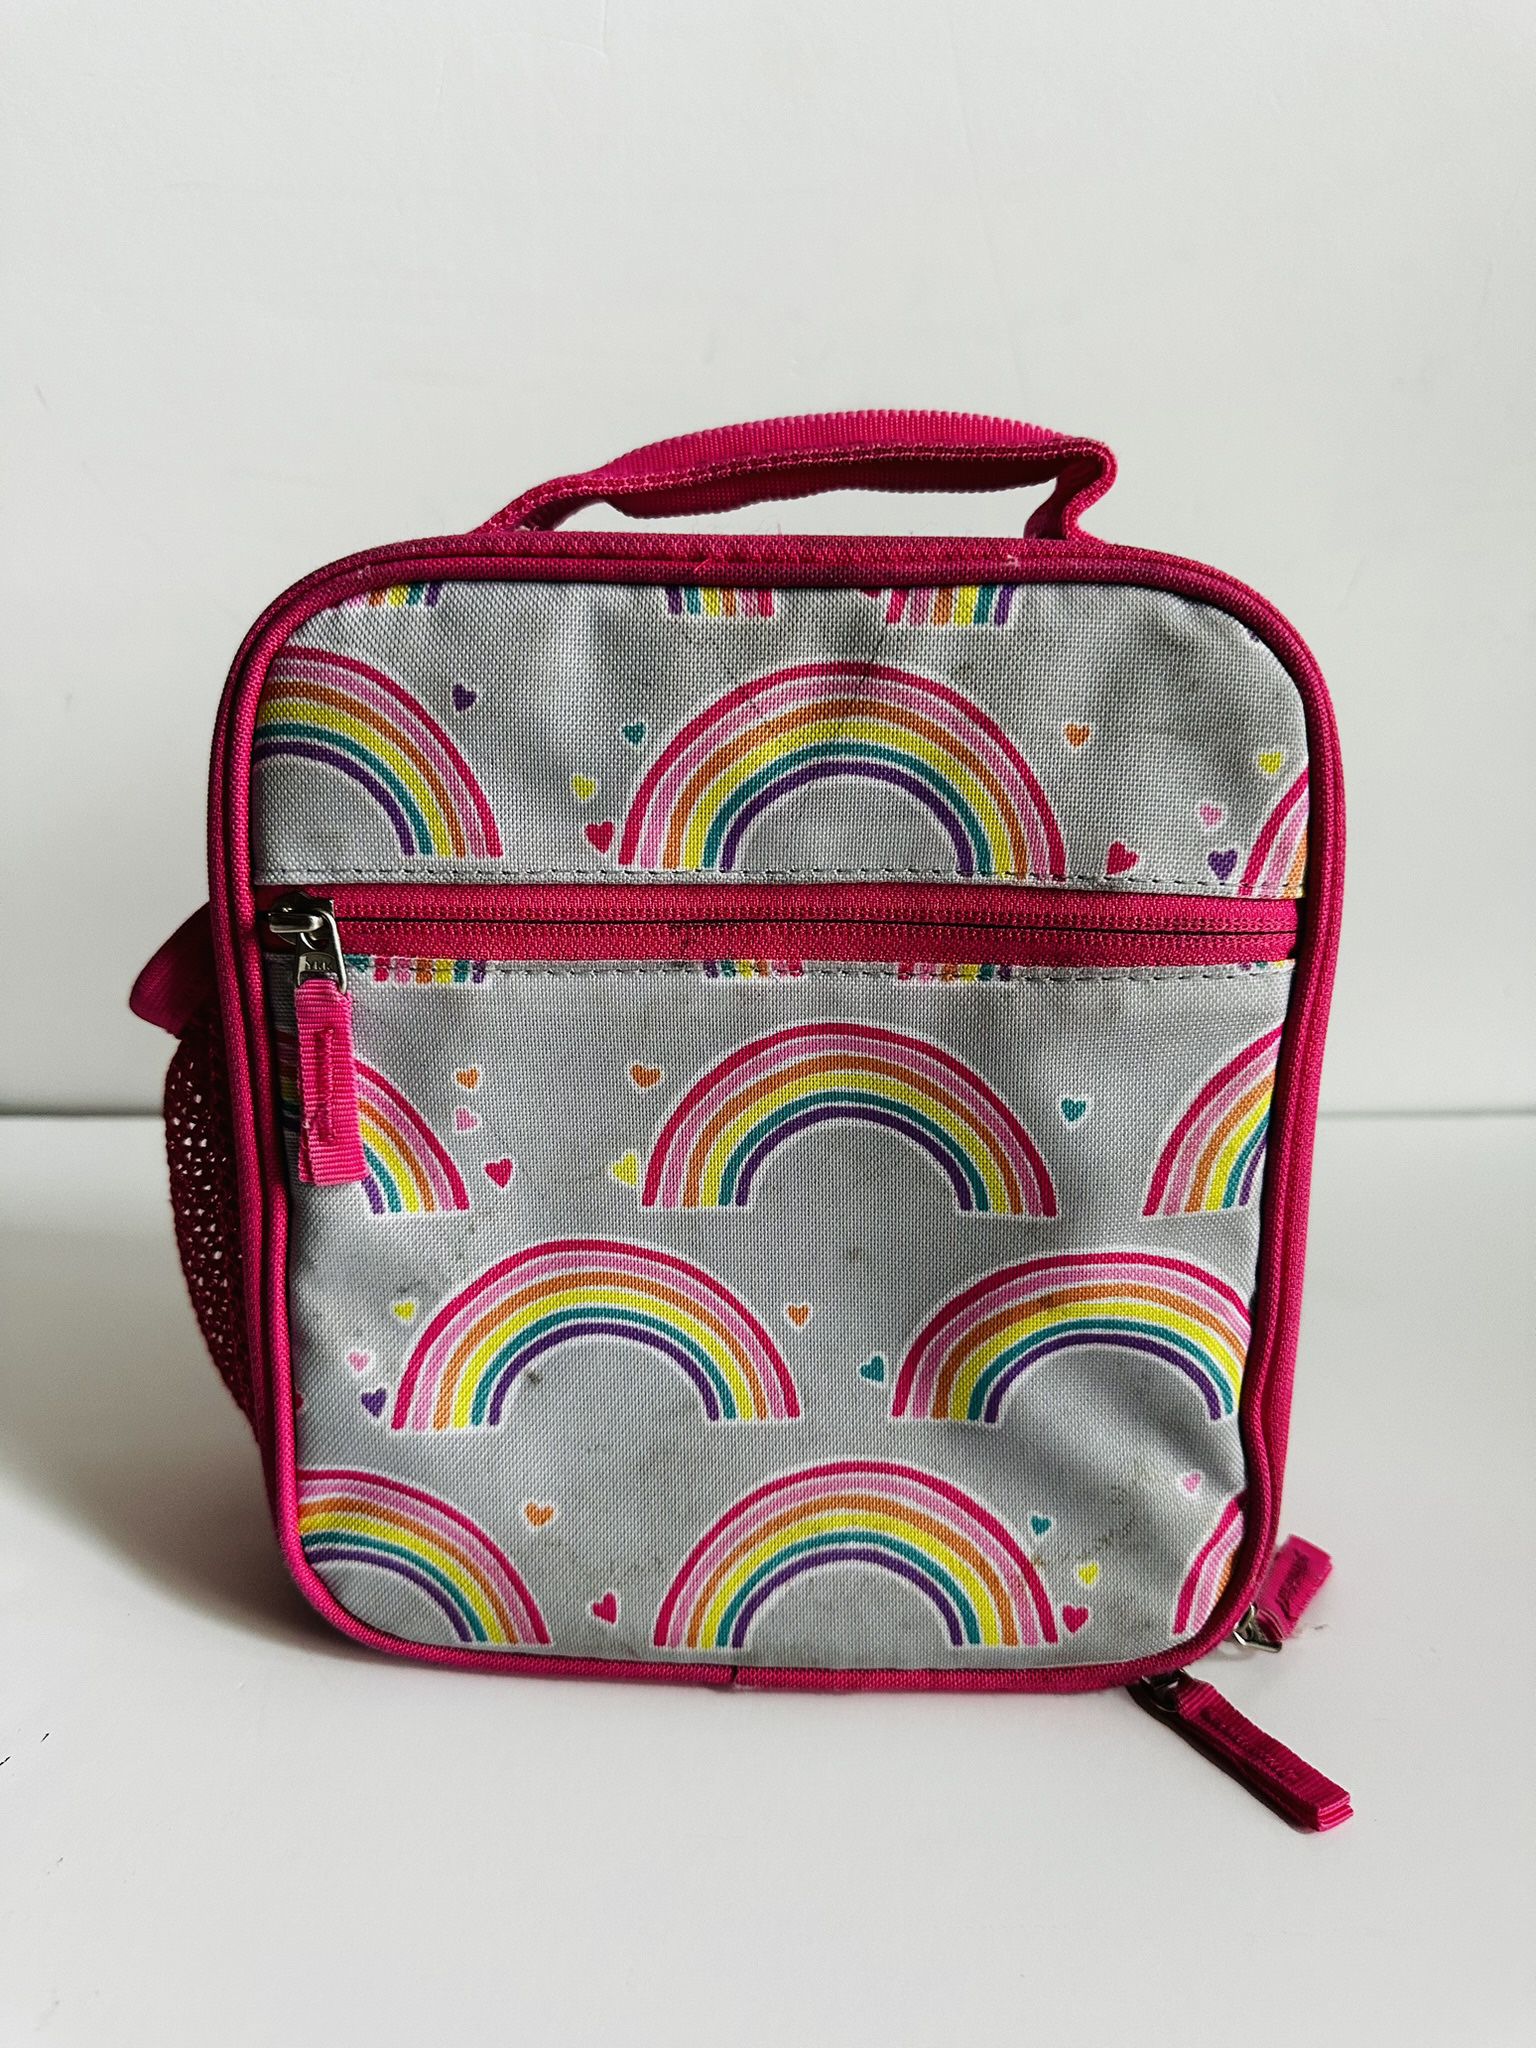 Pottery Barn Classic Lunch bag Grey Pink Rainbows Heart Kids Collection Designer